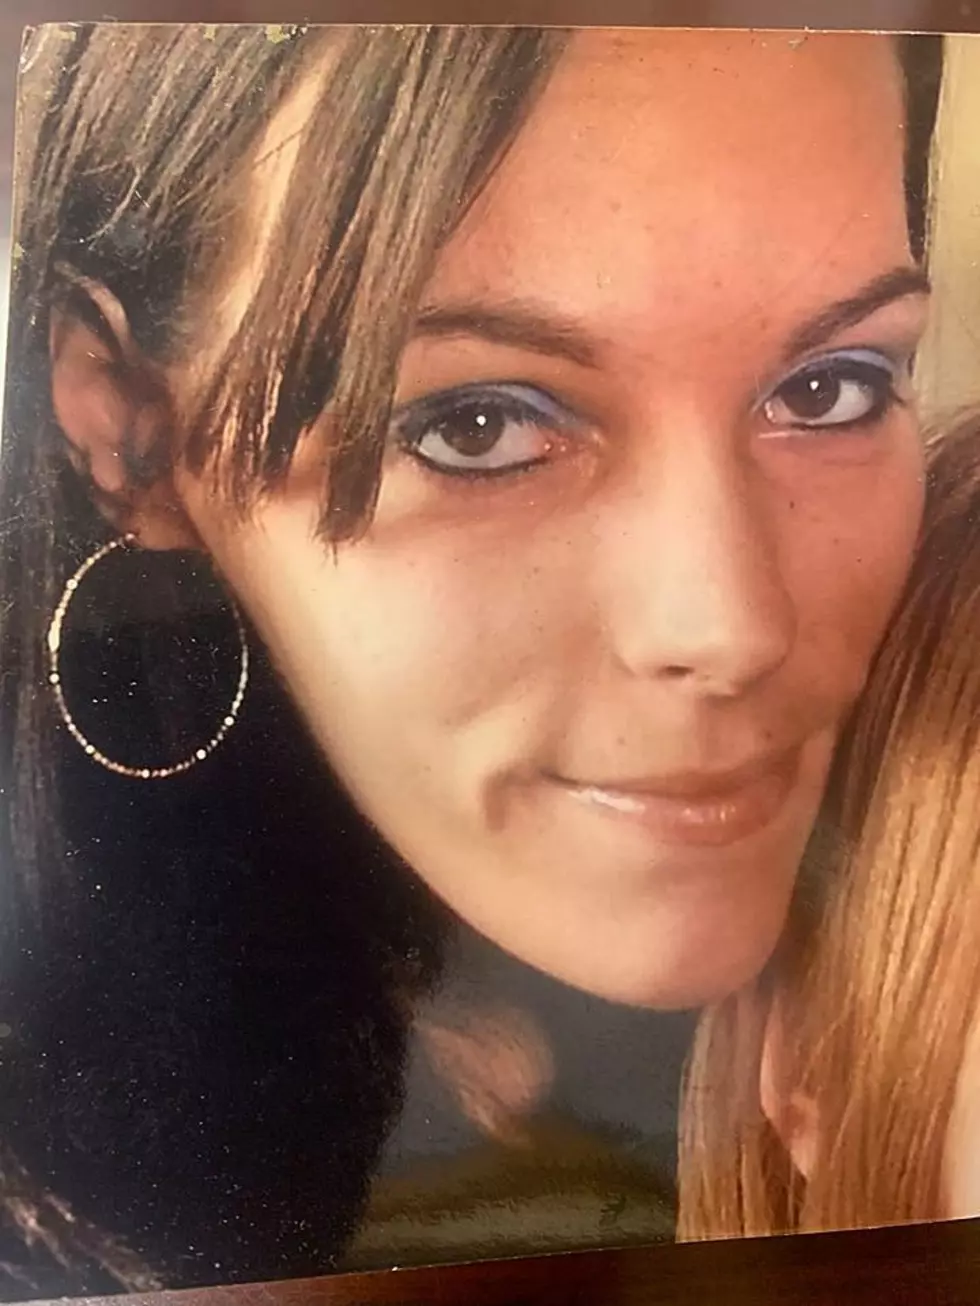 Glen Aubrey Woman Reported Missing After Leaving Party in Apalachin